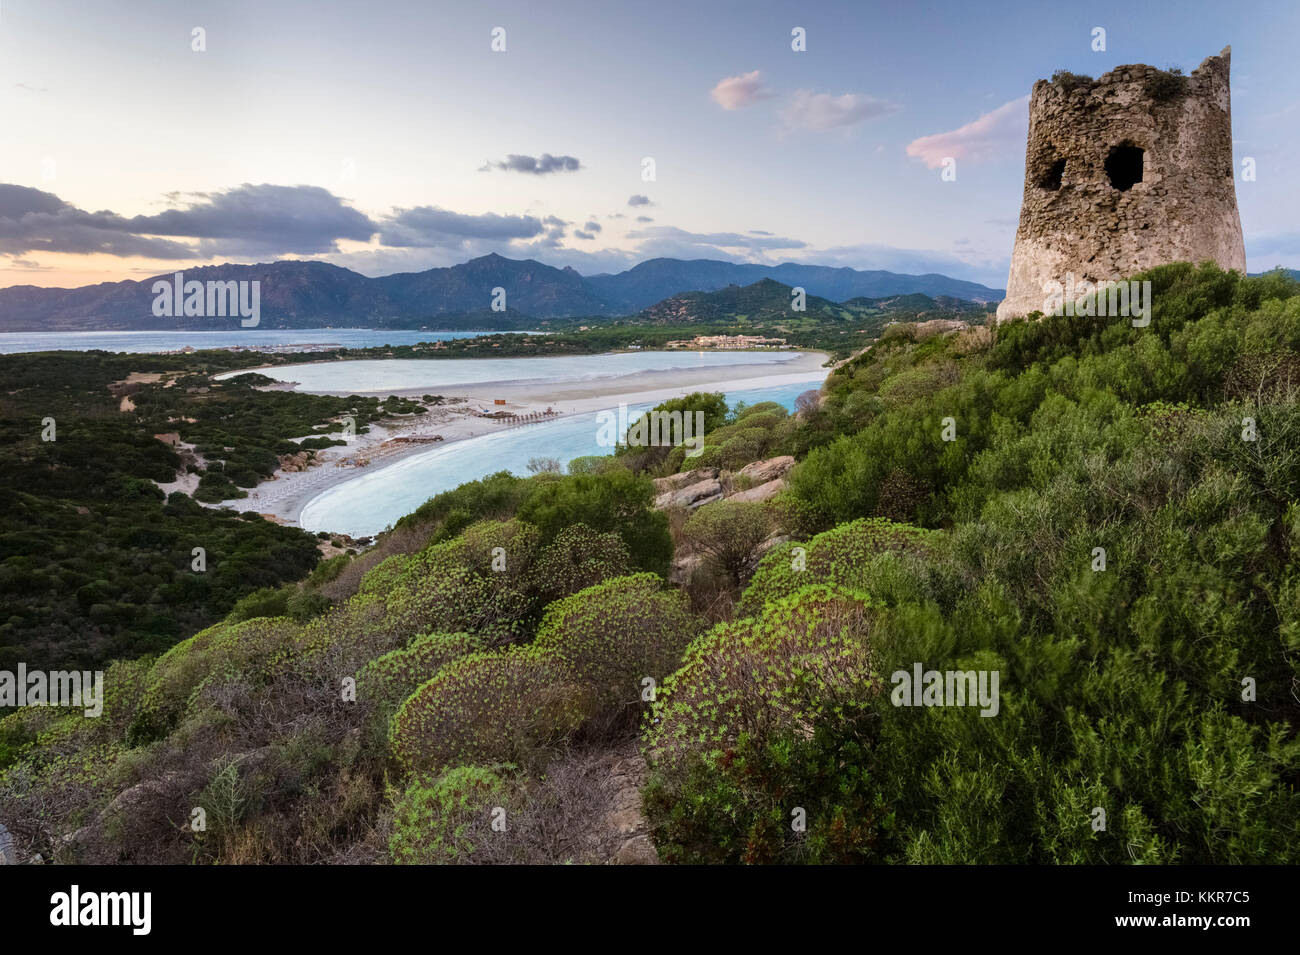 View of the beach of Porto Giunco and the Notteri pond at sunset from the old tower of Capo Carbonara, Villasimius, Cagliari, Sardinia, Italy, Europe. Stock Photo